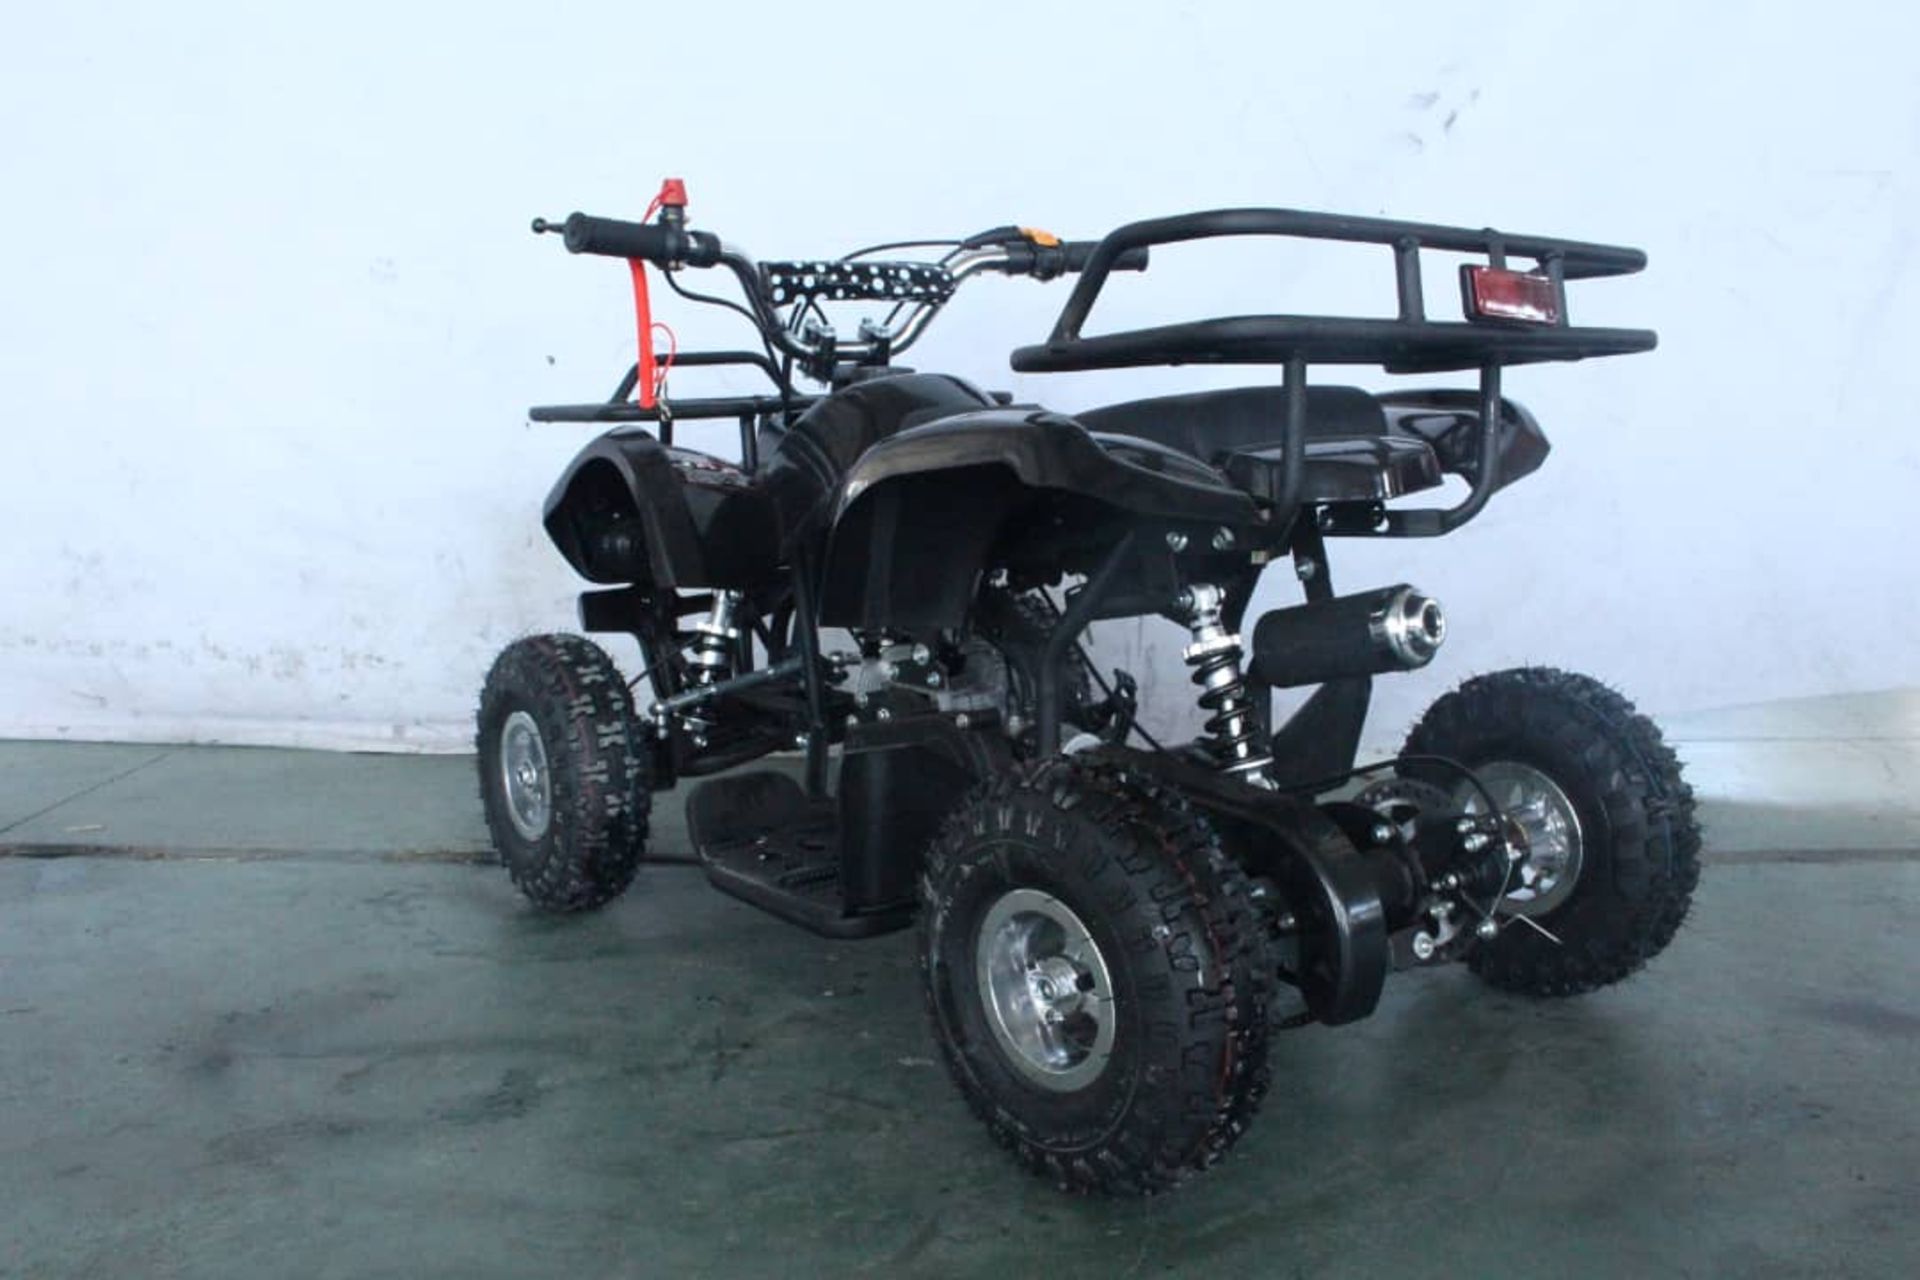 + VAT Brand New 49cc Hawk Mini Quad Bike - Colours May Vary - Full Front And Rear Suspension - Disk - Image 4 of 9